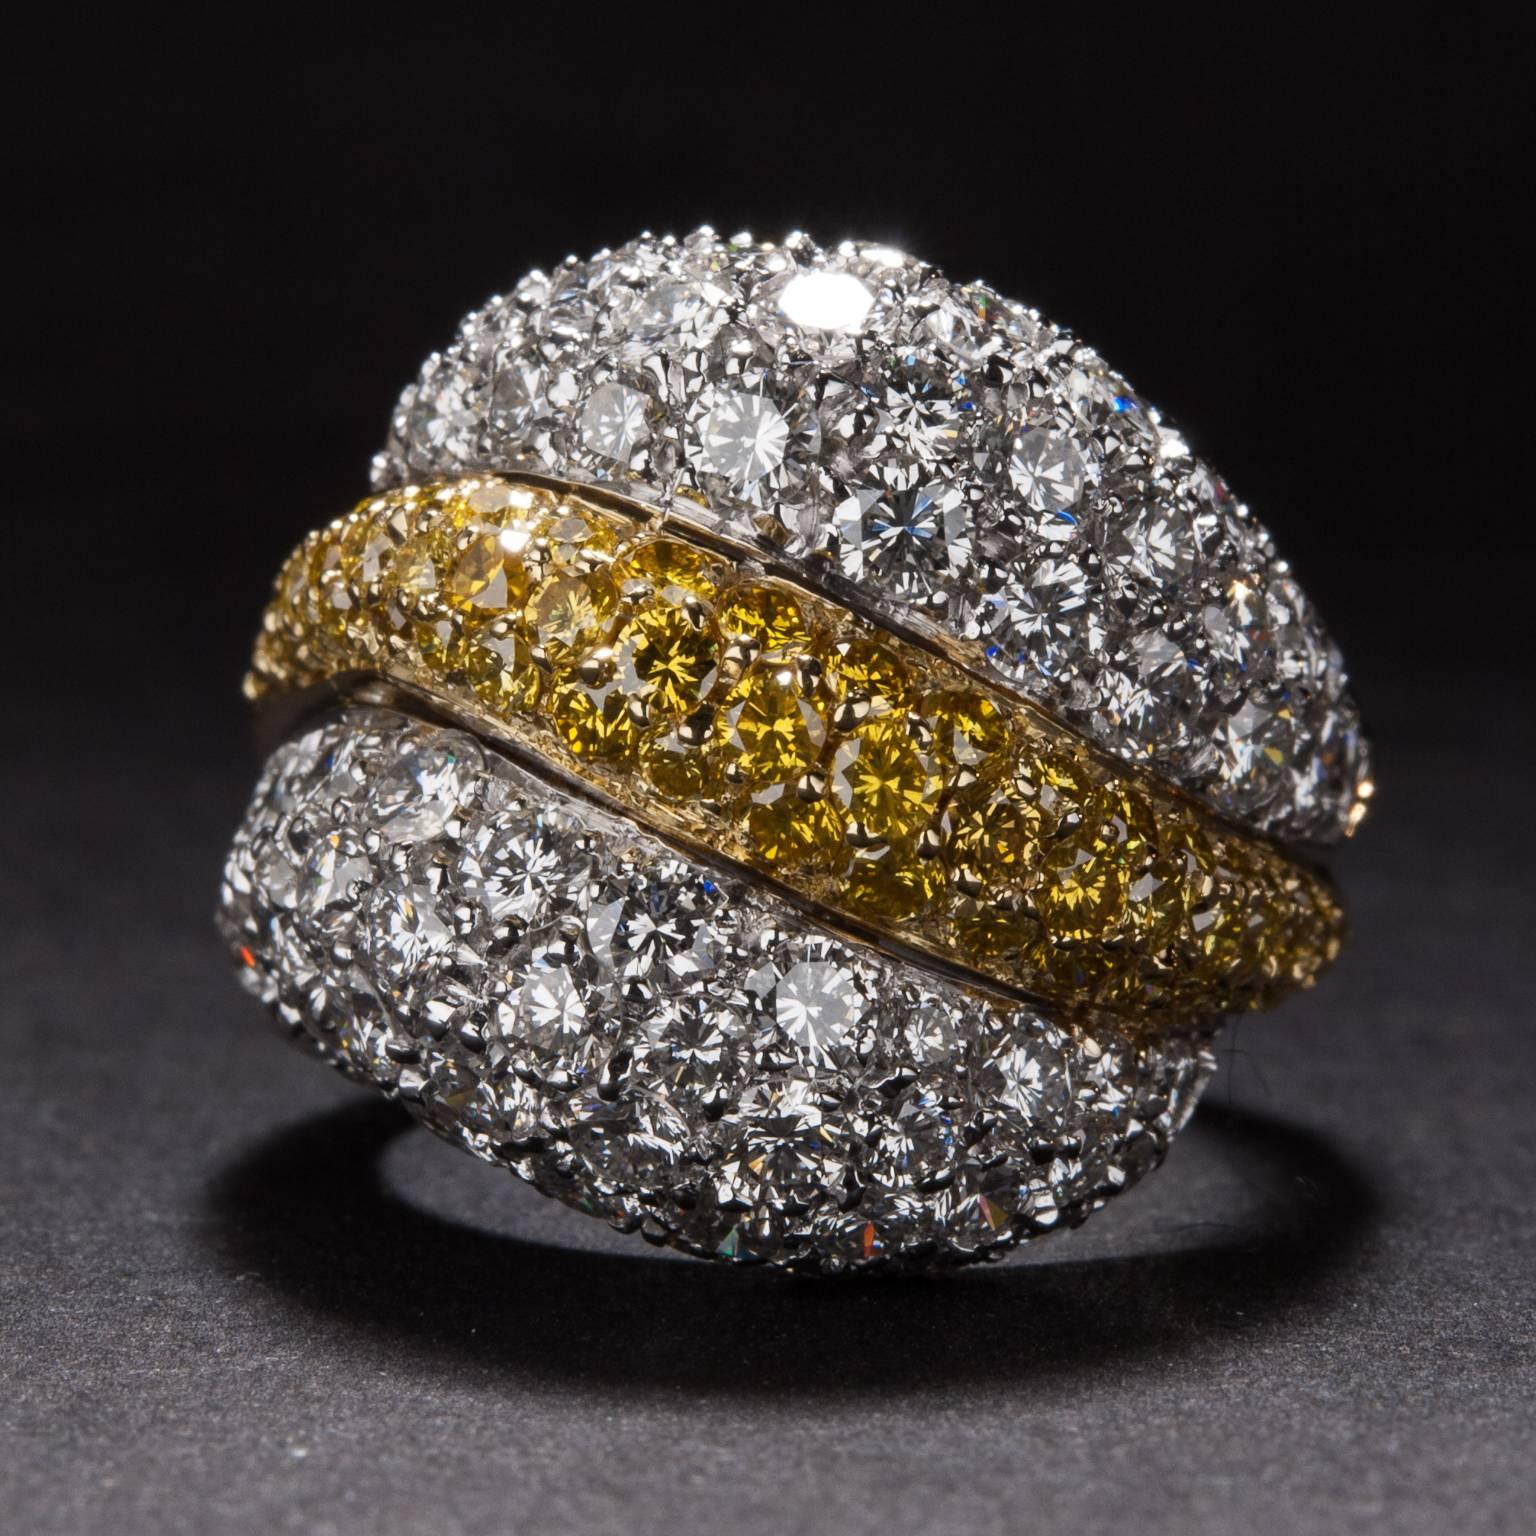 A bold and beautiful ring from Italian designer Luca Carati. This stunning piece features 3.98 total carats of white diamond (E-F color, VS2 clarity) and .98 total carats of yellow diamond. The elegant two-tone mounting is crafted in 18 karat gold.